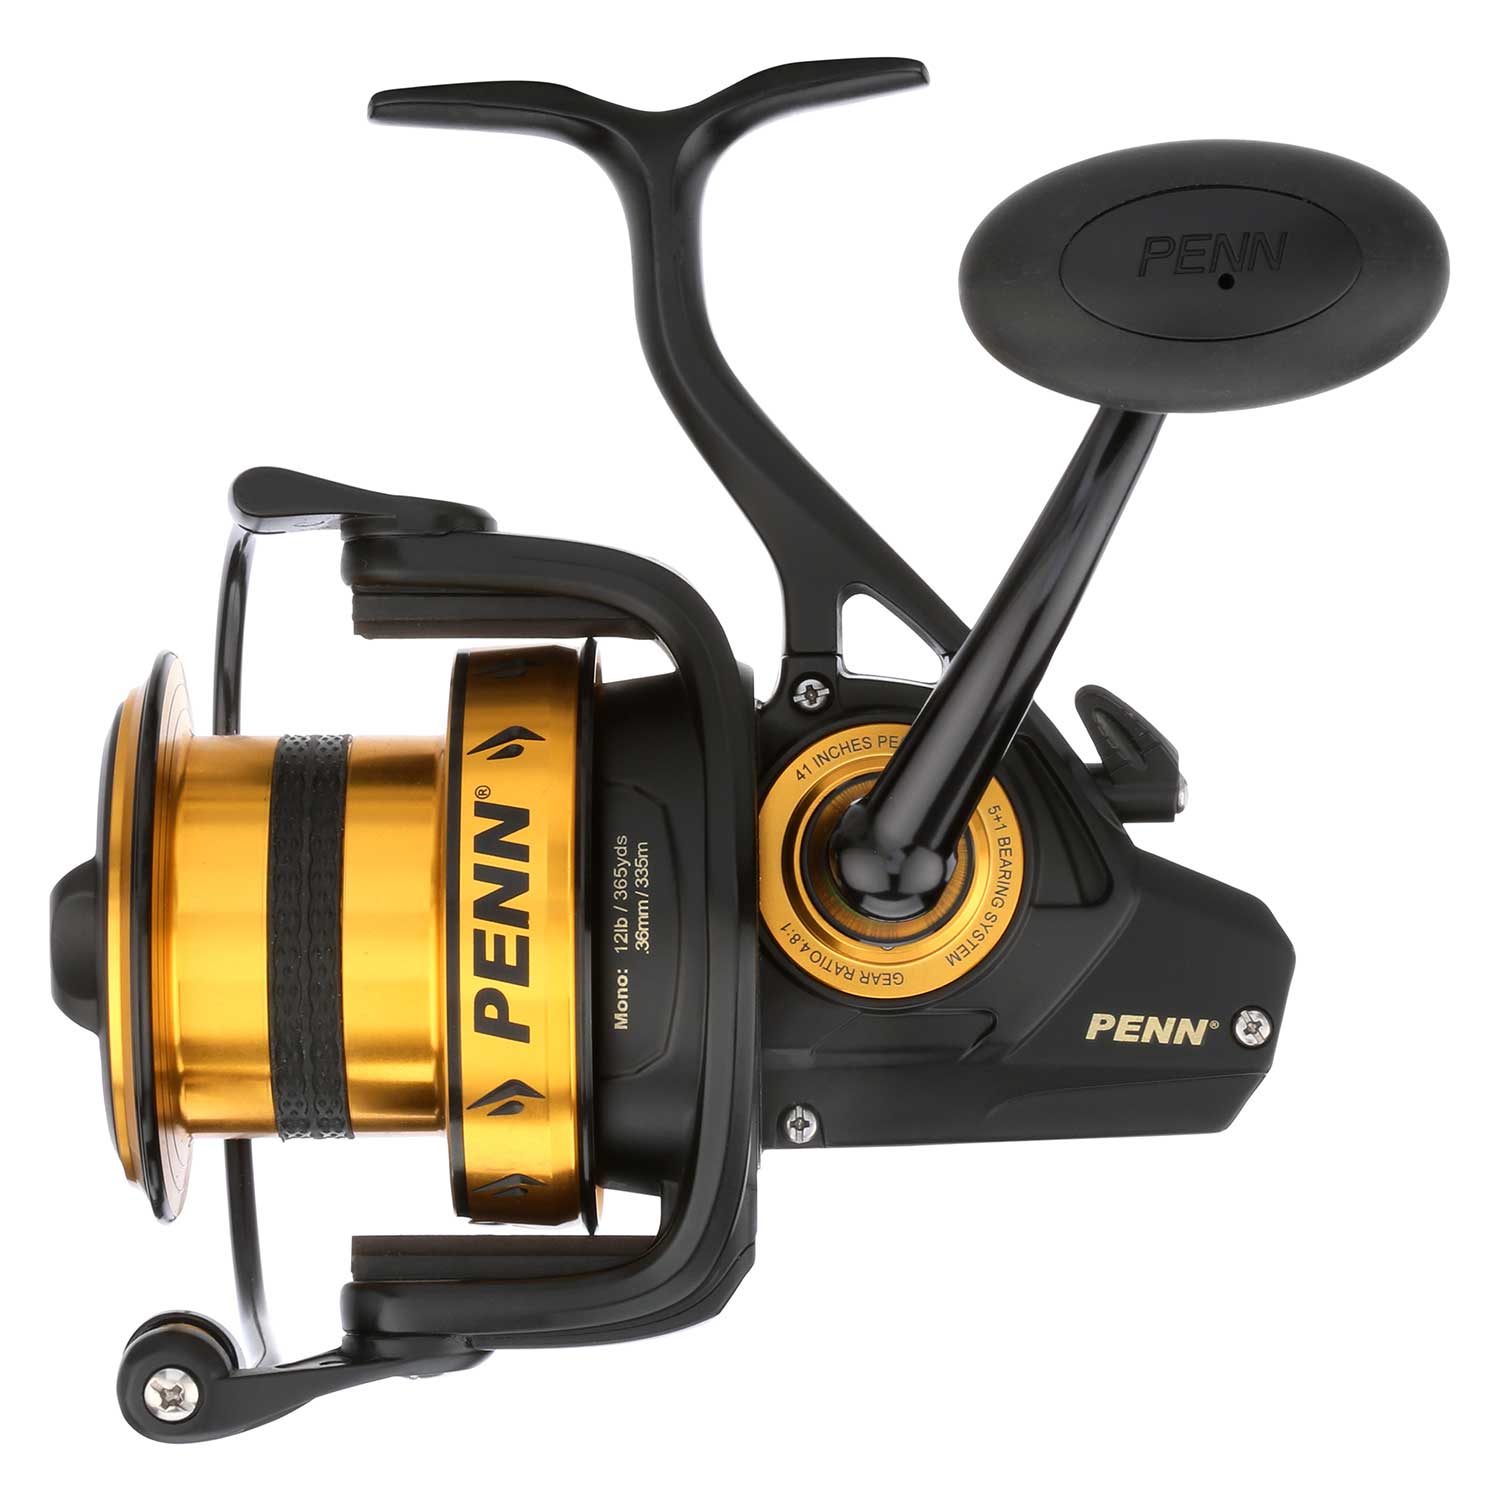 Penn 750SS Spinfisher Fishing Reel with Box